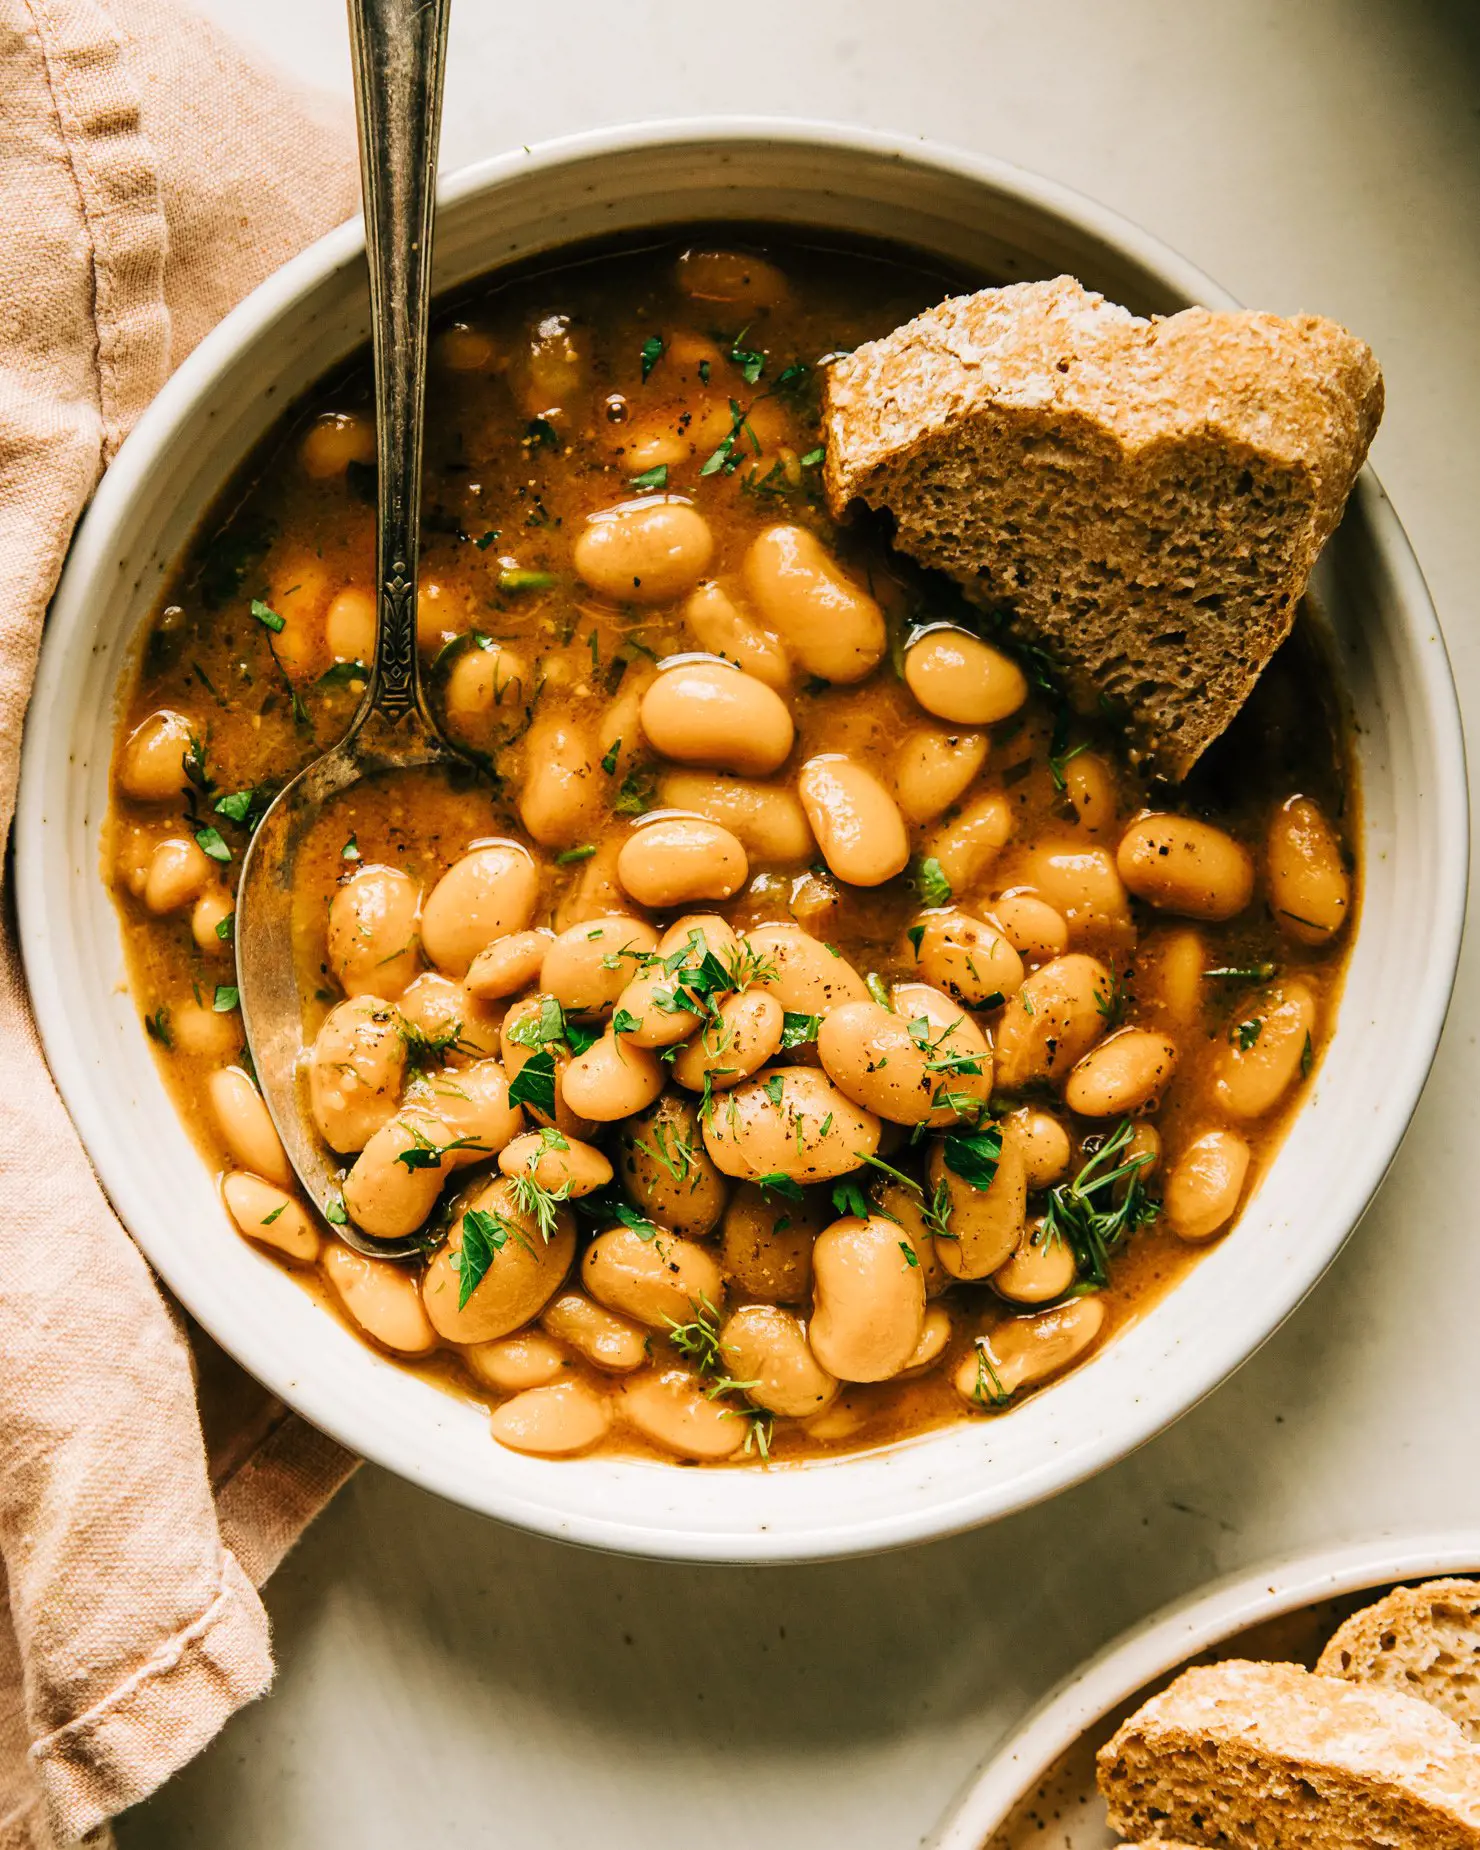 Vegan Beans are a great source of protein in a plant-based diet